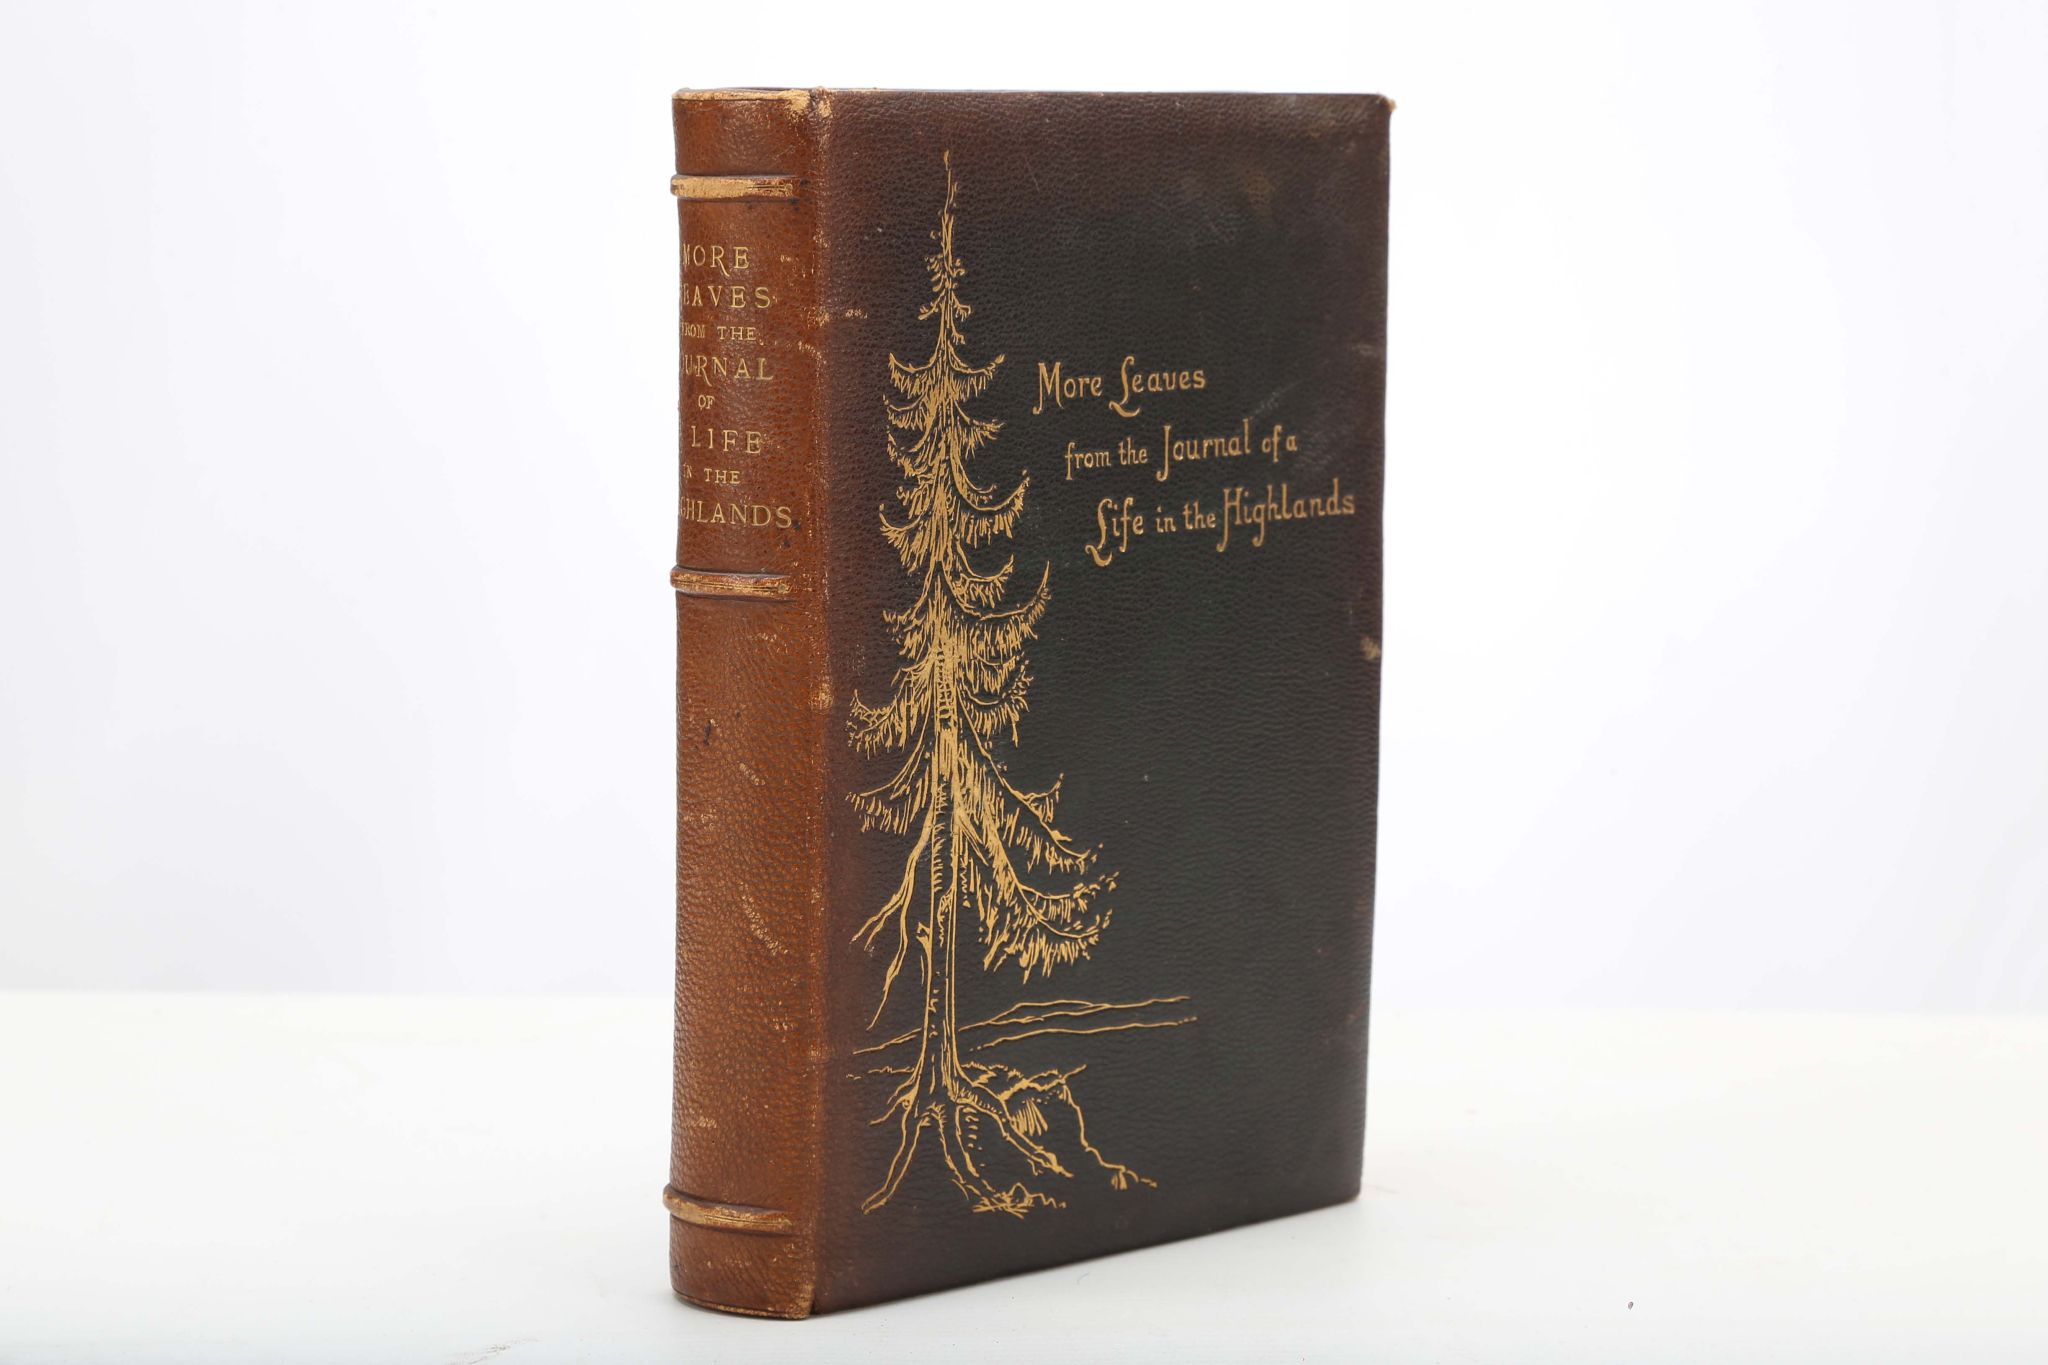 [HELPS, Arthur (1813-75, editor)]. More Leaves from the Journal of a Life in the Highlands.